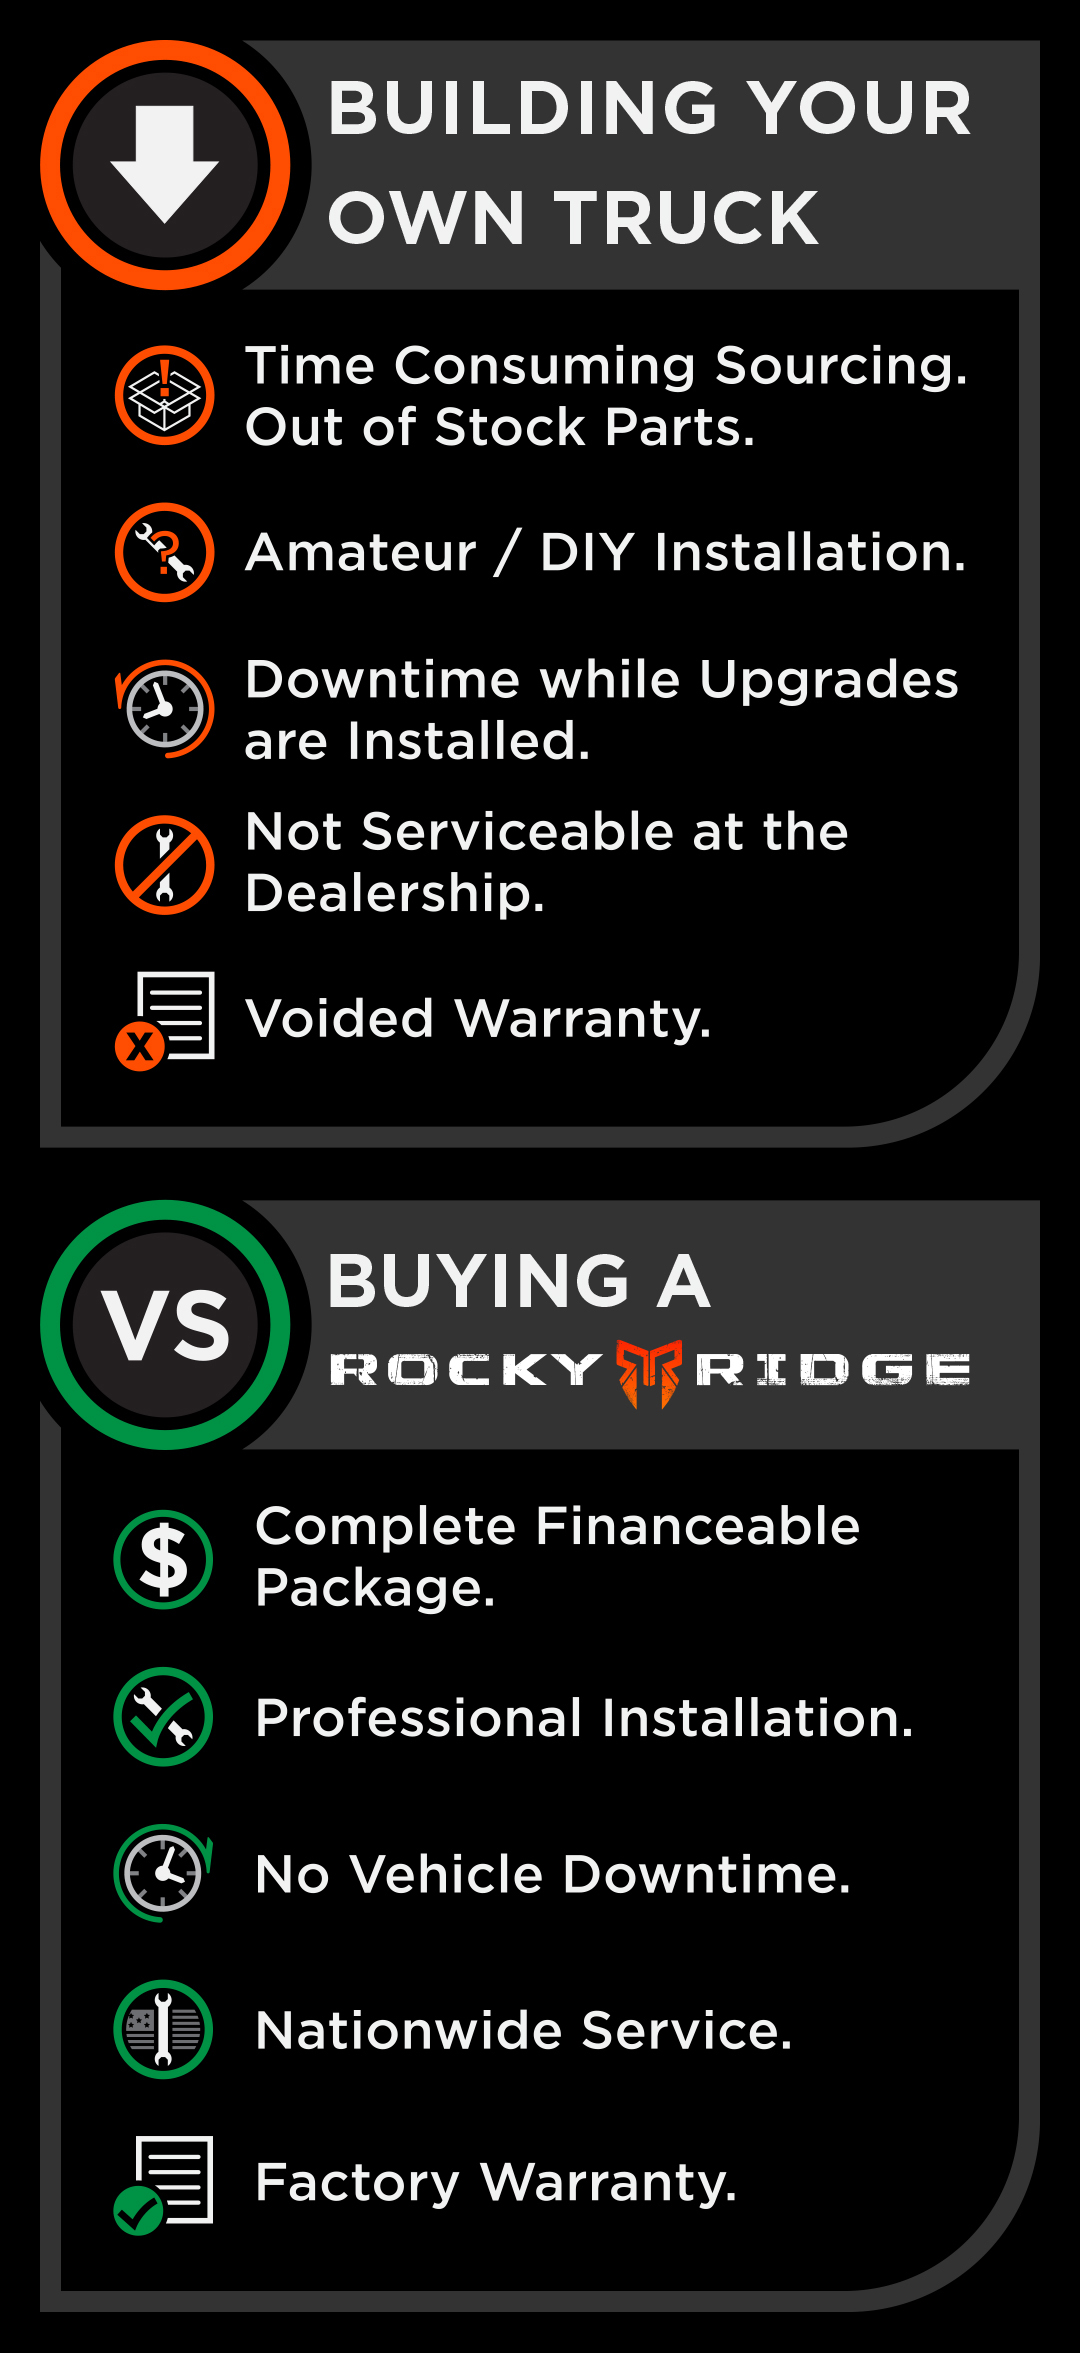 What's different about buying a Rocky Ridge